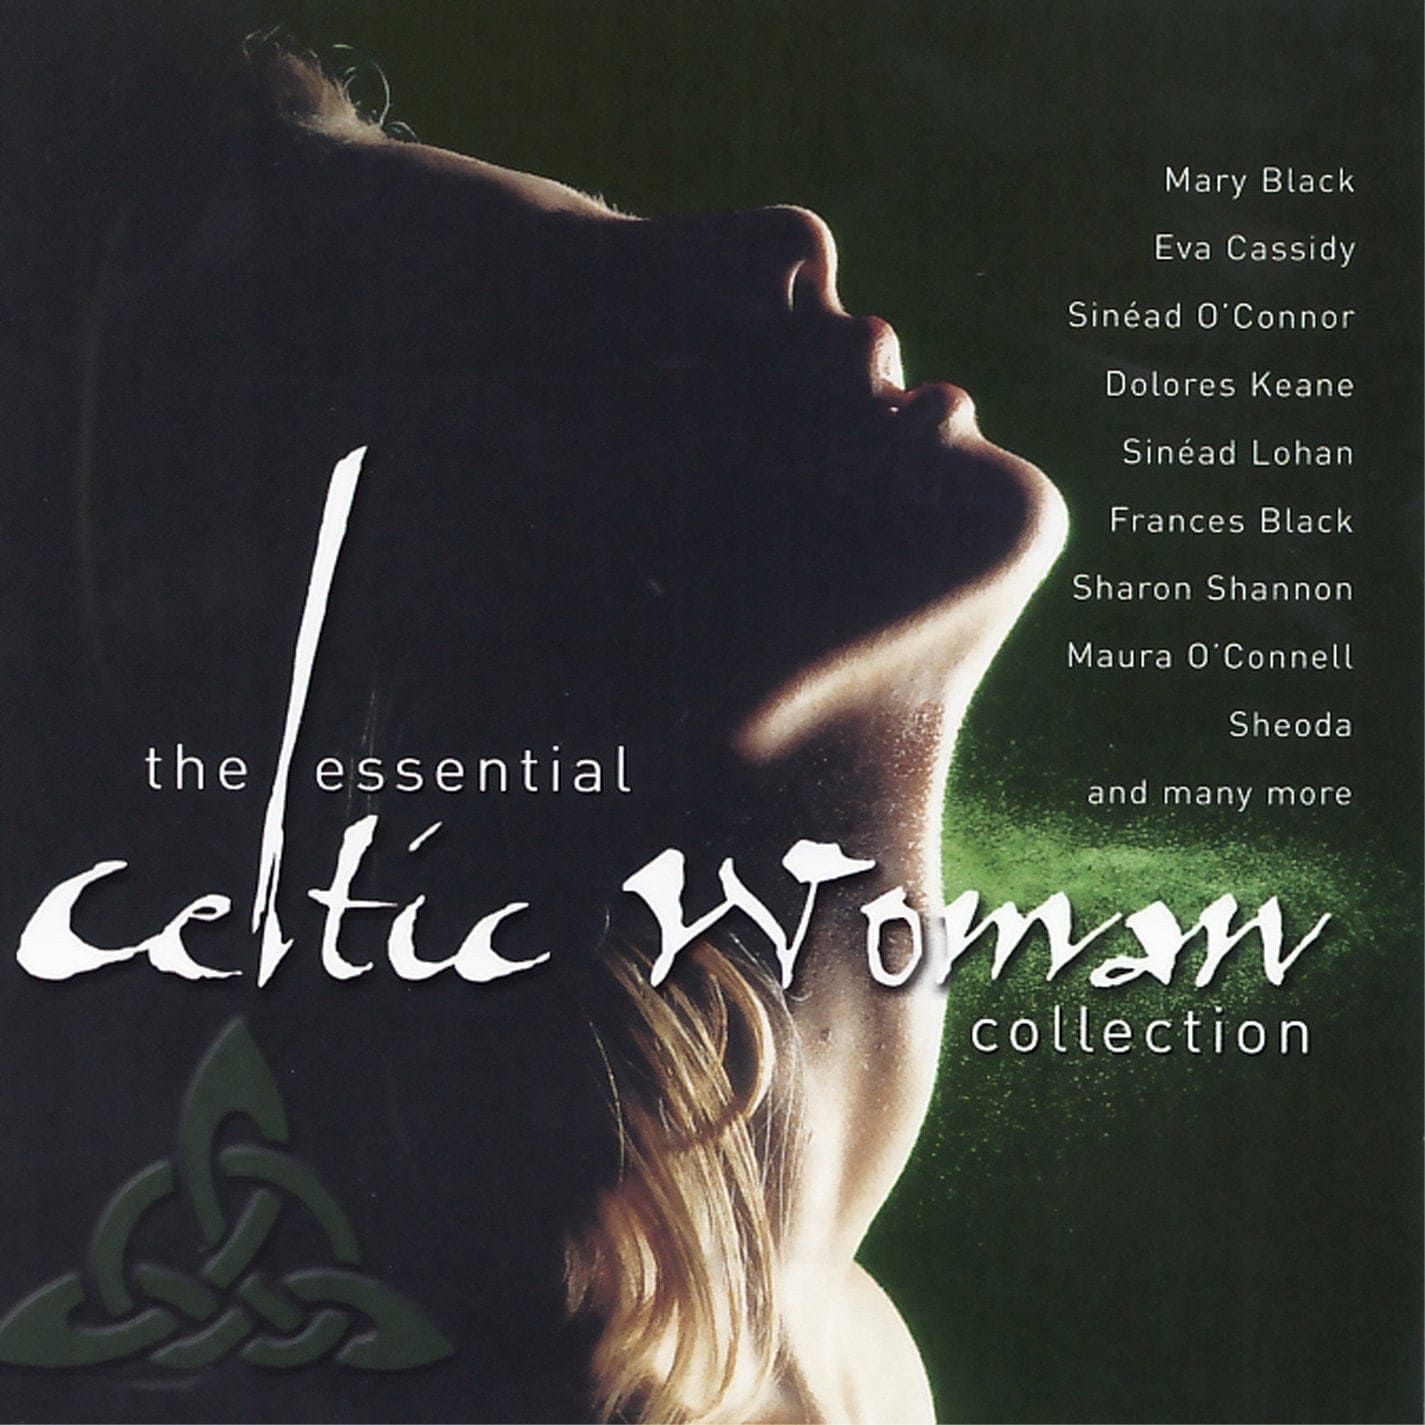 The Essential Celtic Woman Collection - Various Artists [2CD]